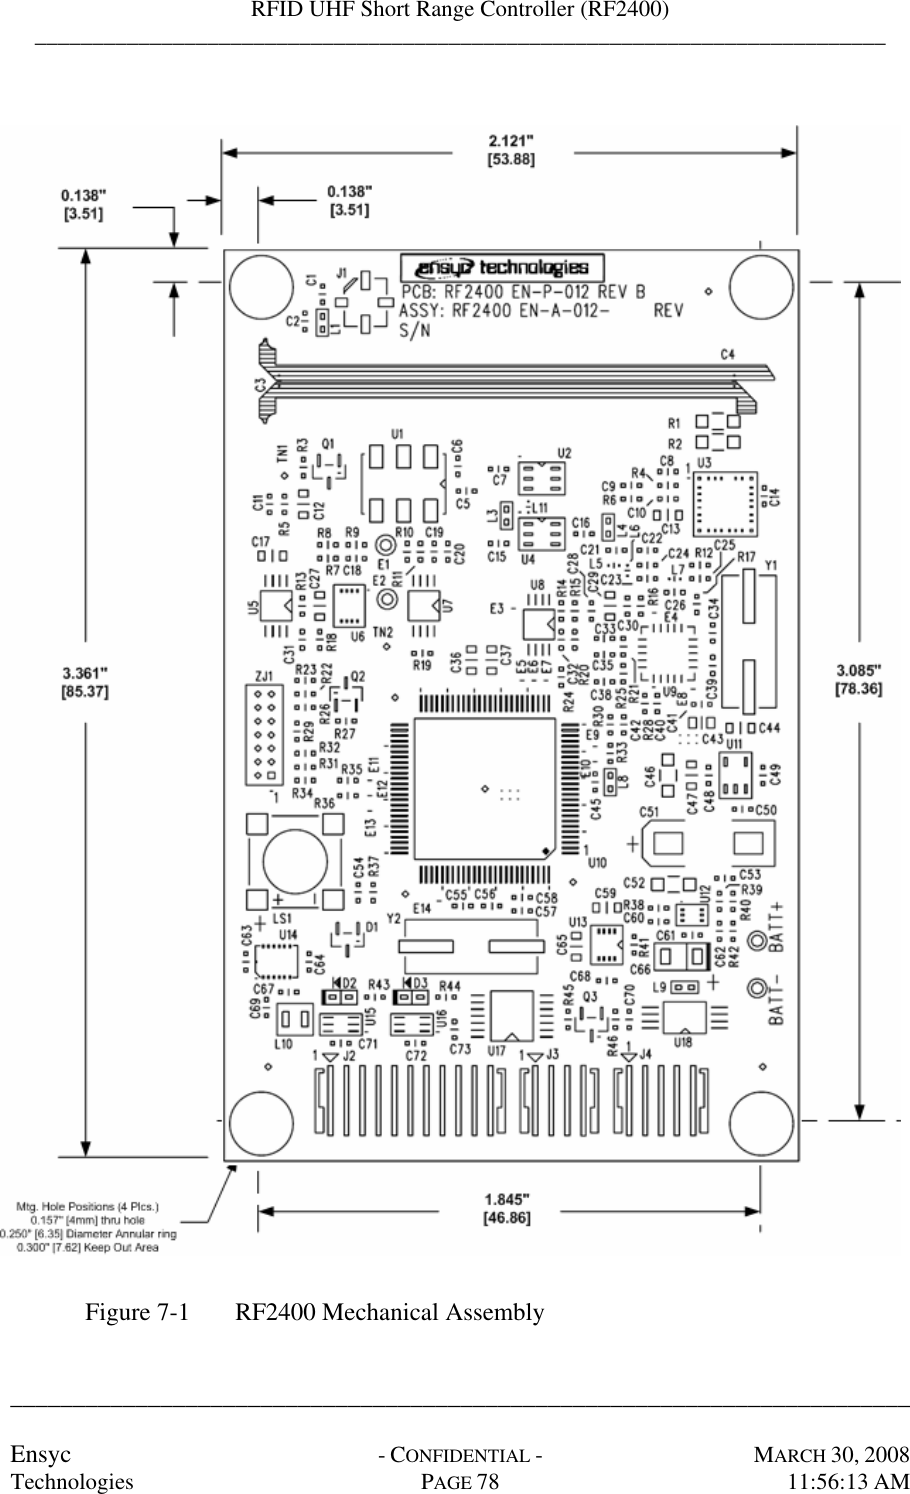 RFID UHF Short Range Controller (RF2400) __________________________________________________________________________  ________________________________________________________________________  Ensyc  - CONFIDENTIAL -  MARCH 30, 2008 Technologies  PAGE 78  11:56:13 AM   Figure 7-1  RF2400 Mechanical Assembly  